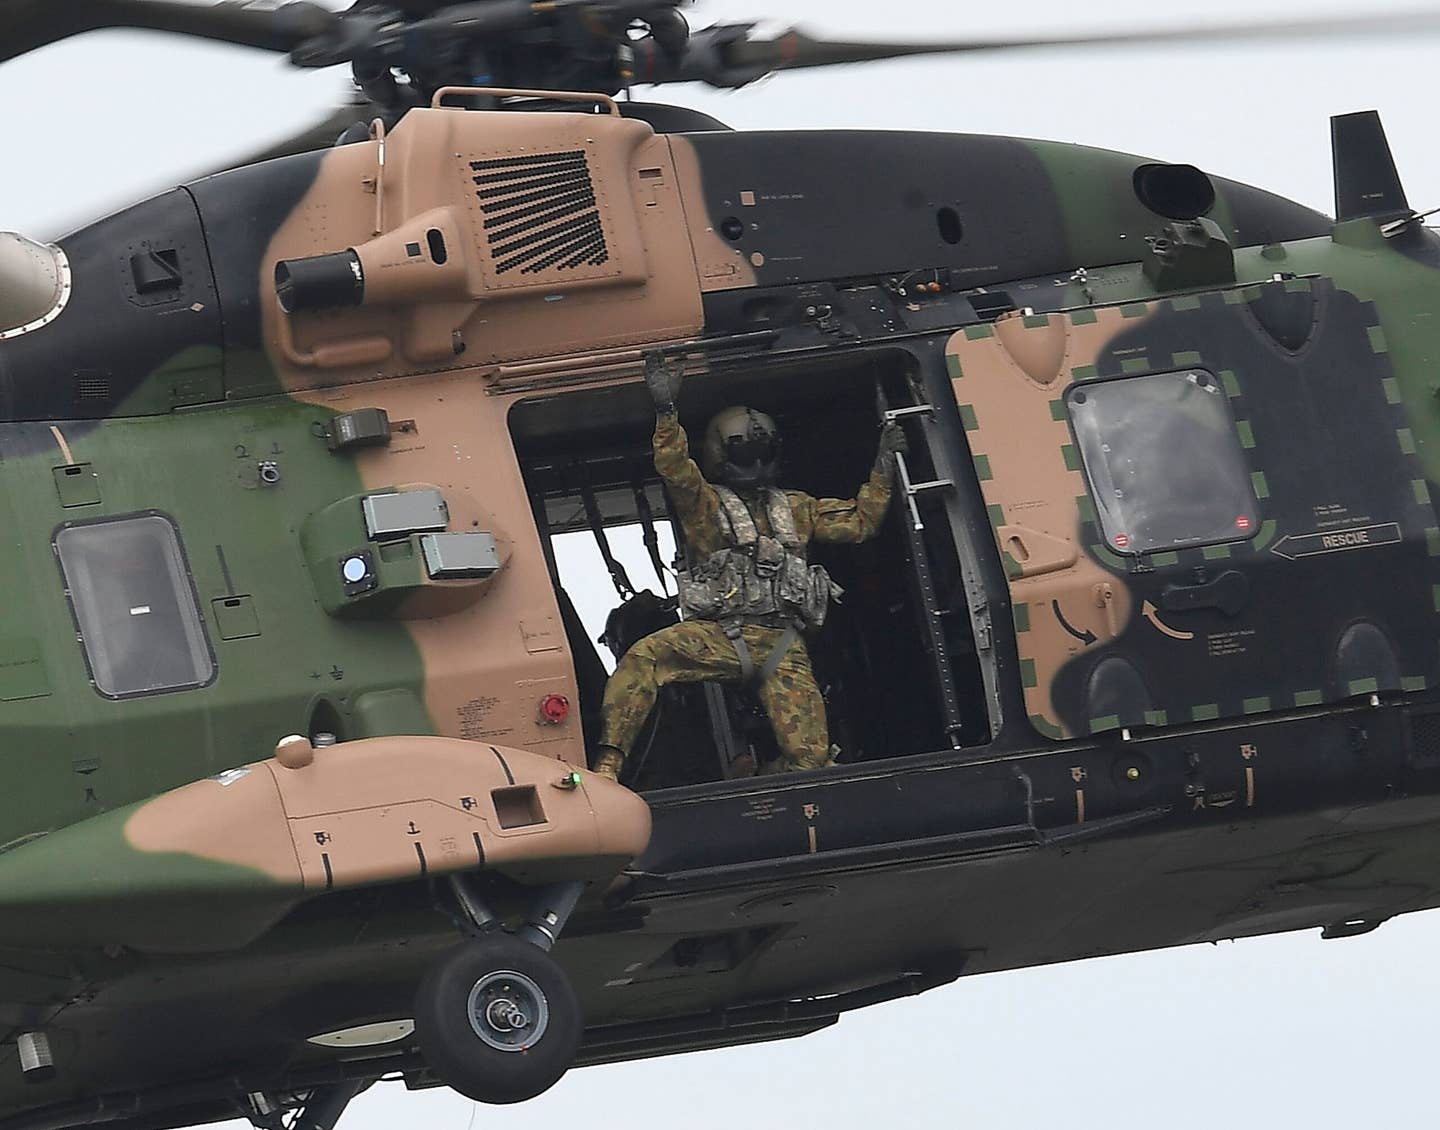 A loadmaster in an Australian Army MRH90 Taipan helicopter waves to the crowd as it performs during the T150 Defense Force Air Show on October 15, 2016, in Townsville, Australia. <em>Photo by Ian Hitchcock/Getty Images</em>